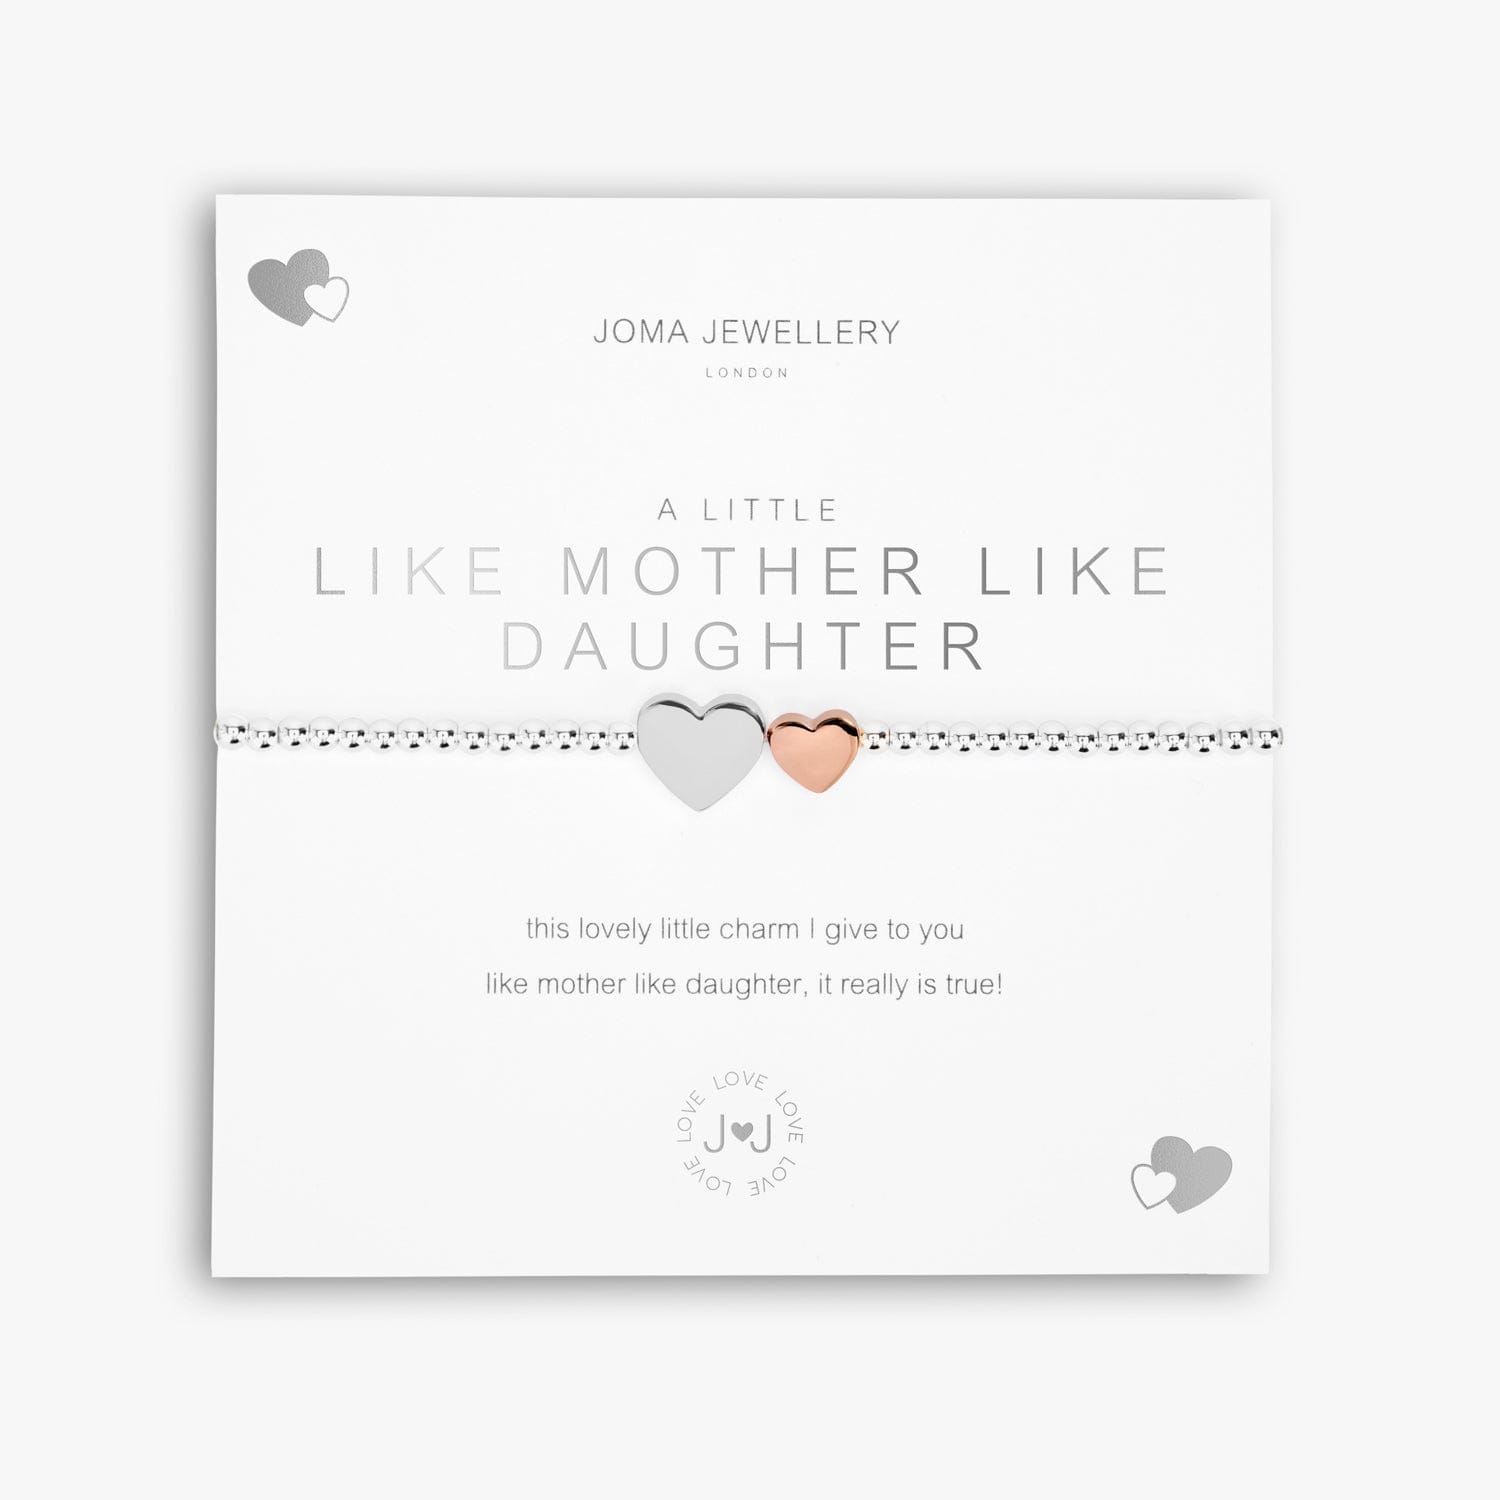 Joma Jewellery Bracelets Joma Jewellery Bracelet - A little Like Mother Like Daughter